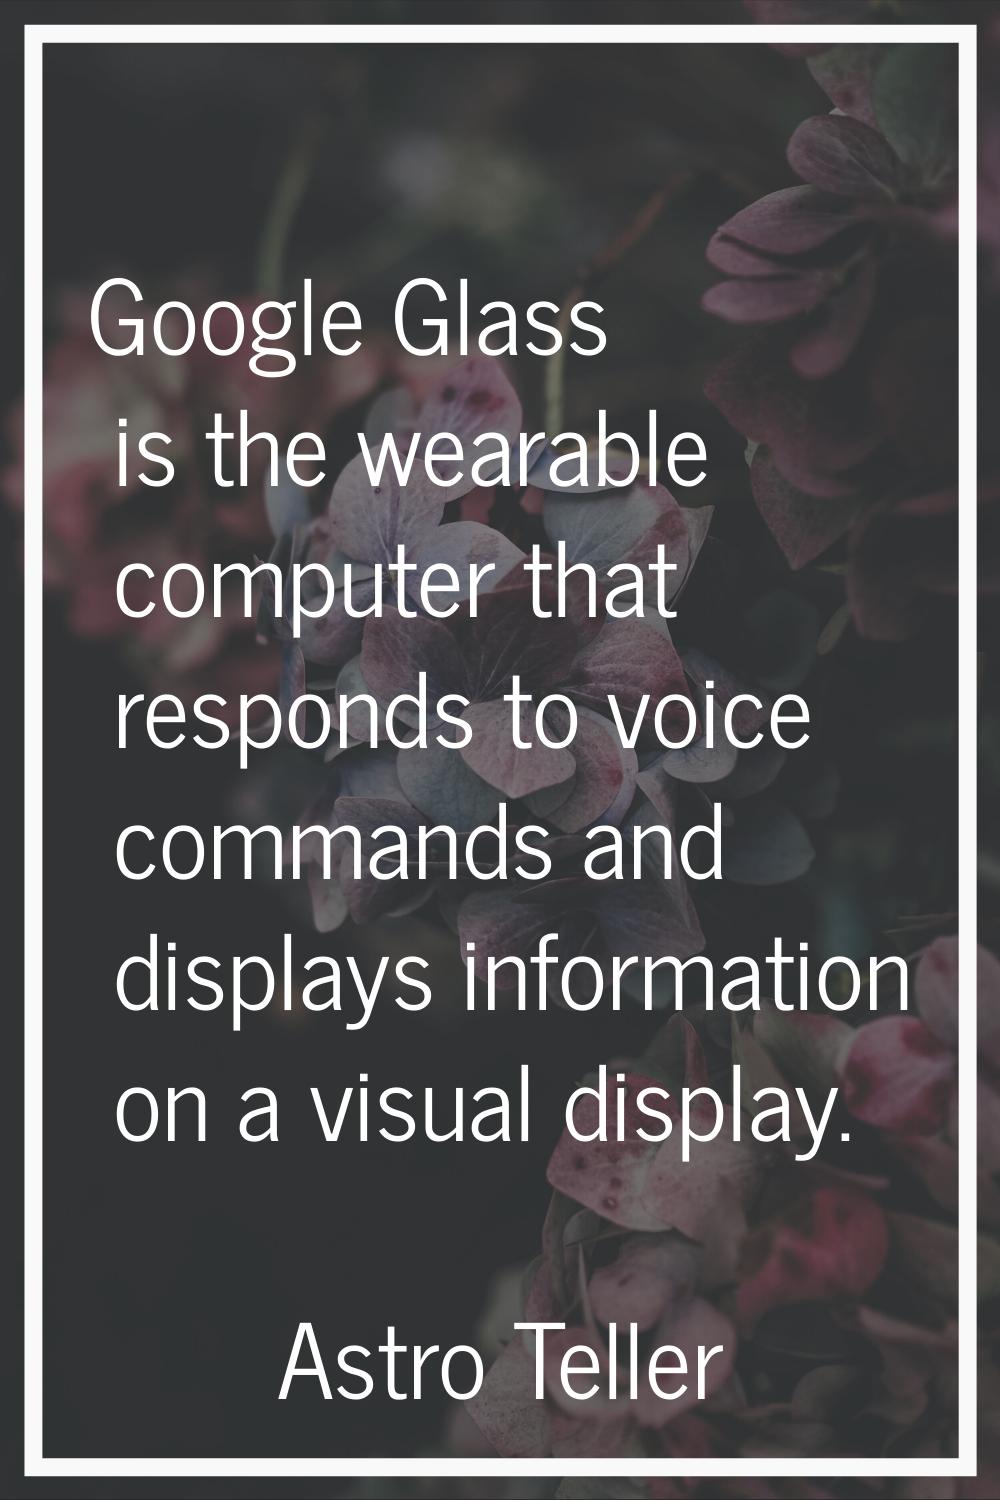 Google Glass is the wearable computer that responds to voice commands and displays information on a